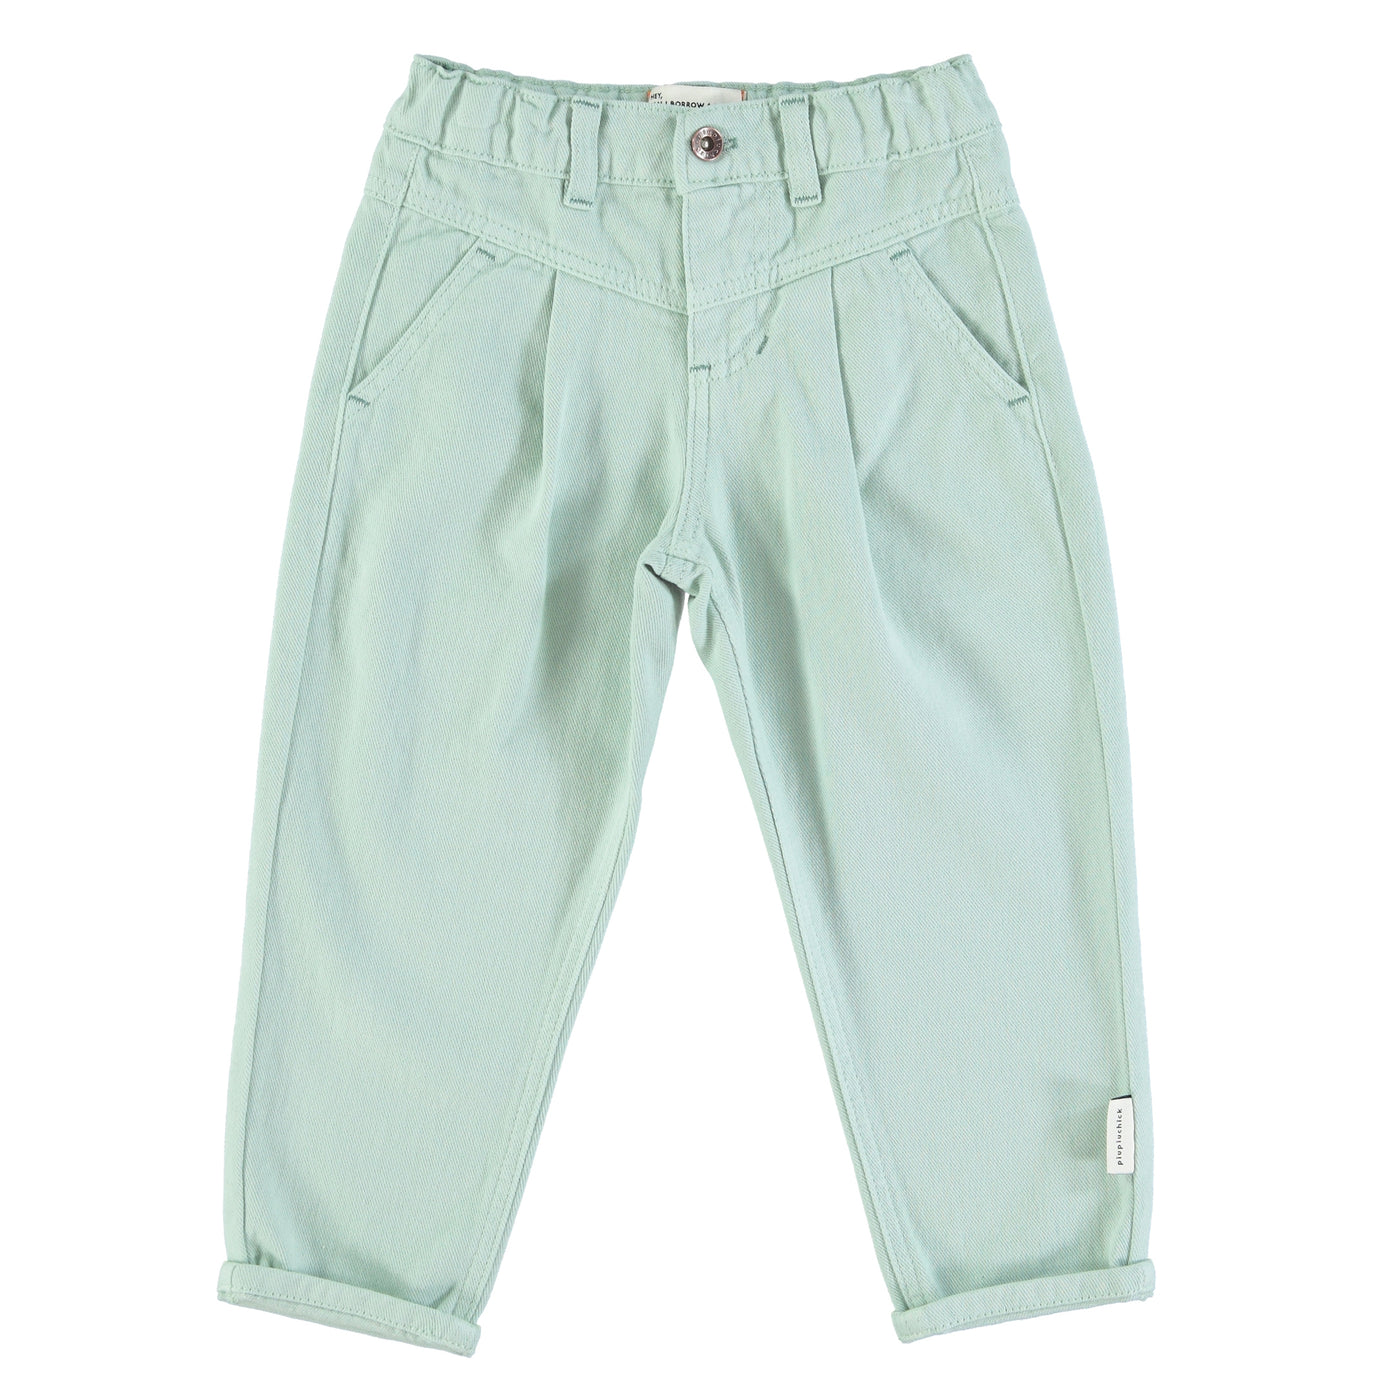 Mom fit trousers light green / 6y